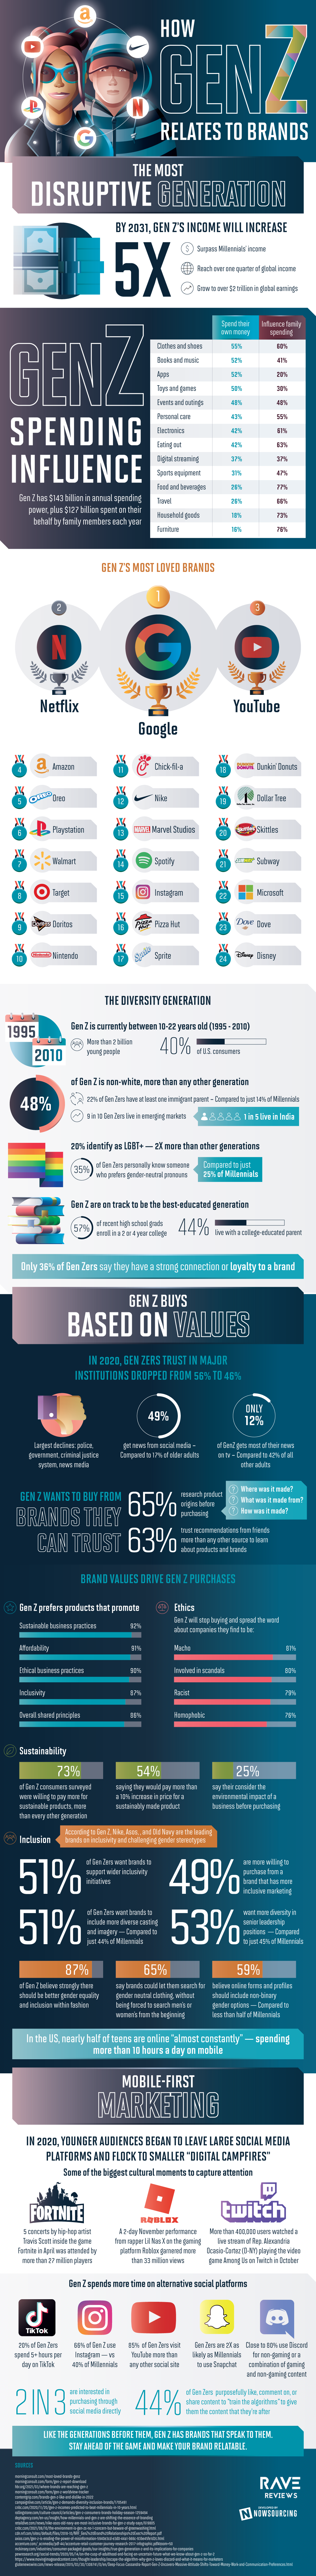 Infographic: How Gen Z is merging business and technology